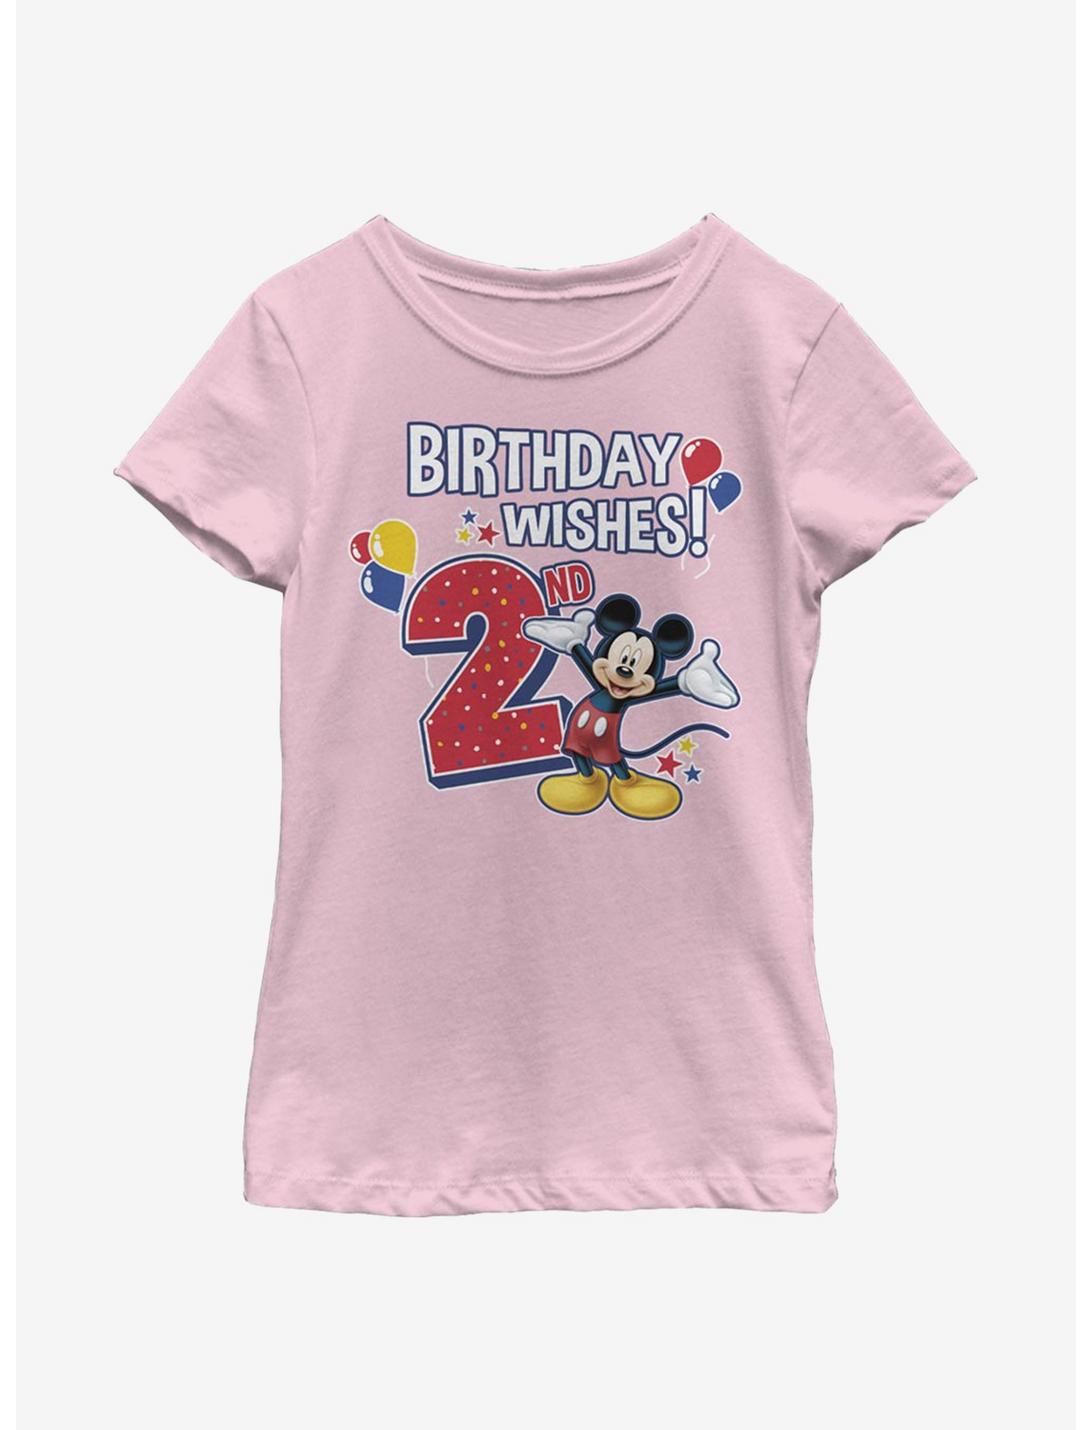 Disney Mickey Mouse Mickey Birthday 2 Youth Girls T-Shirt, PINK, hi-res